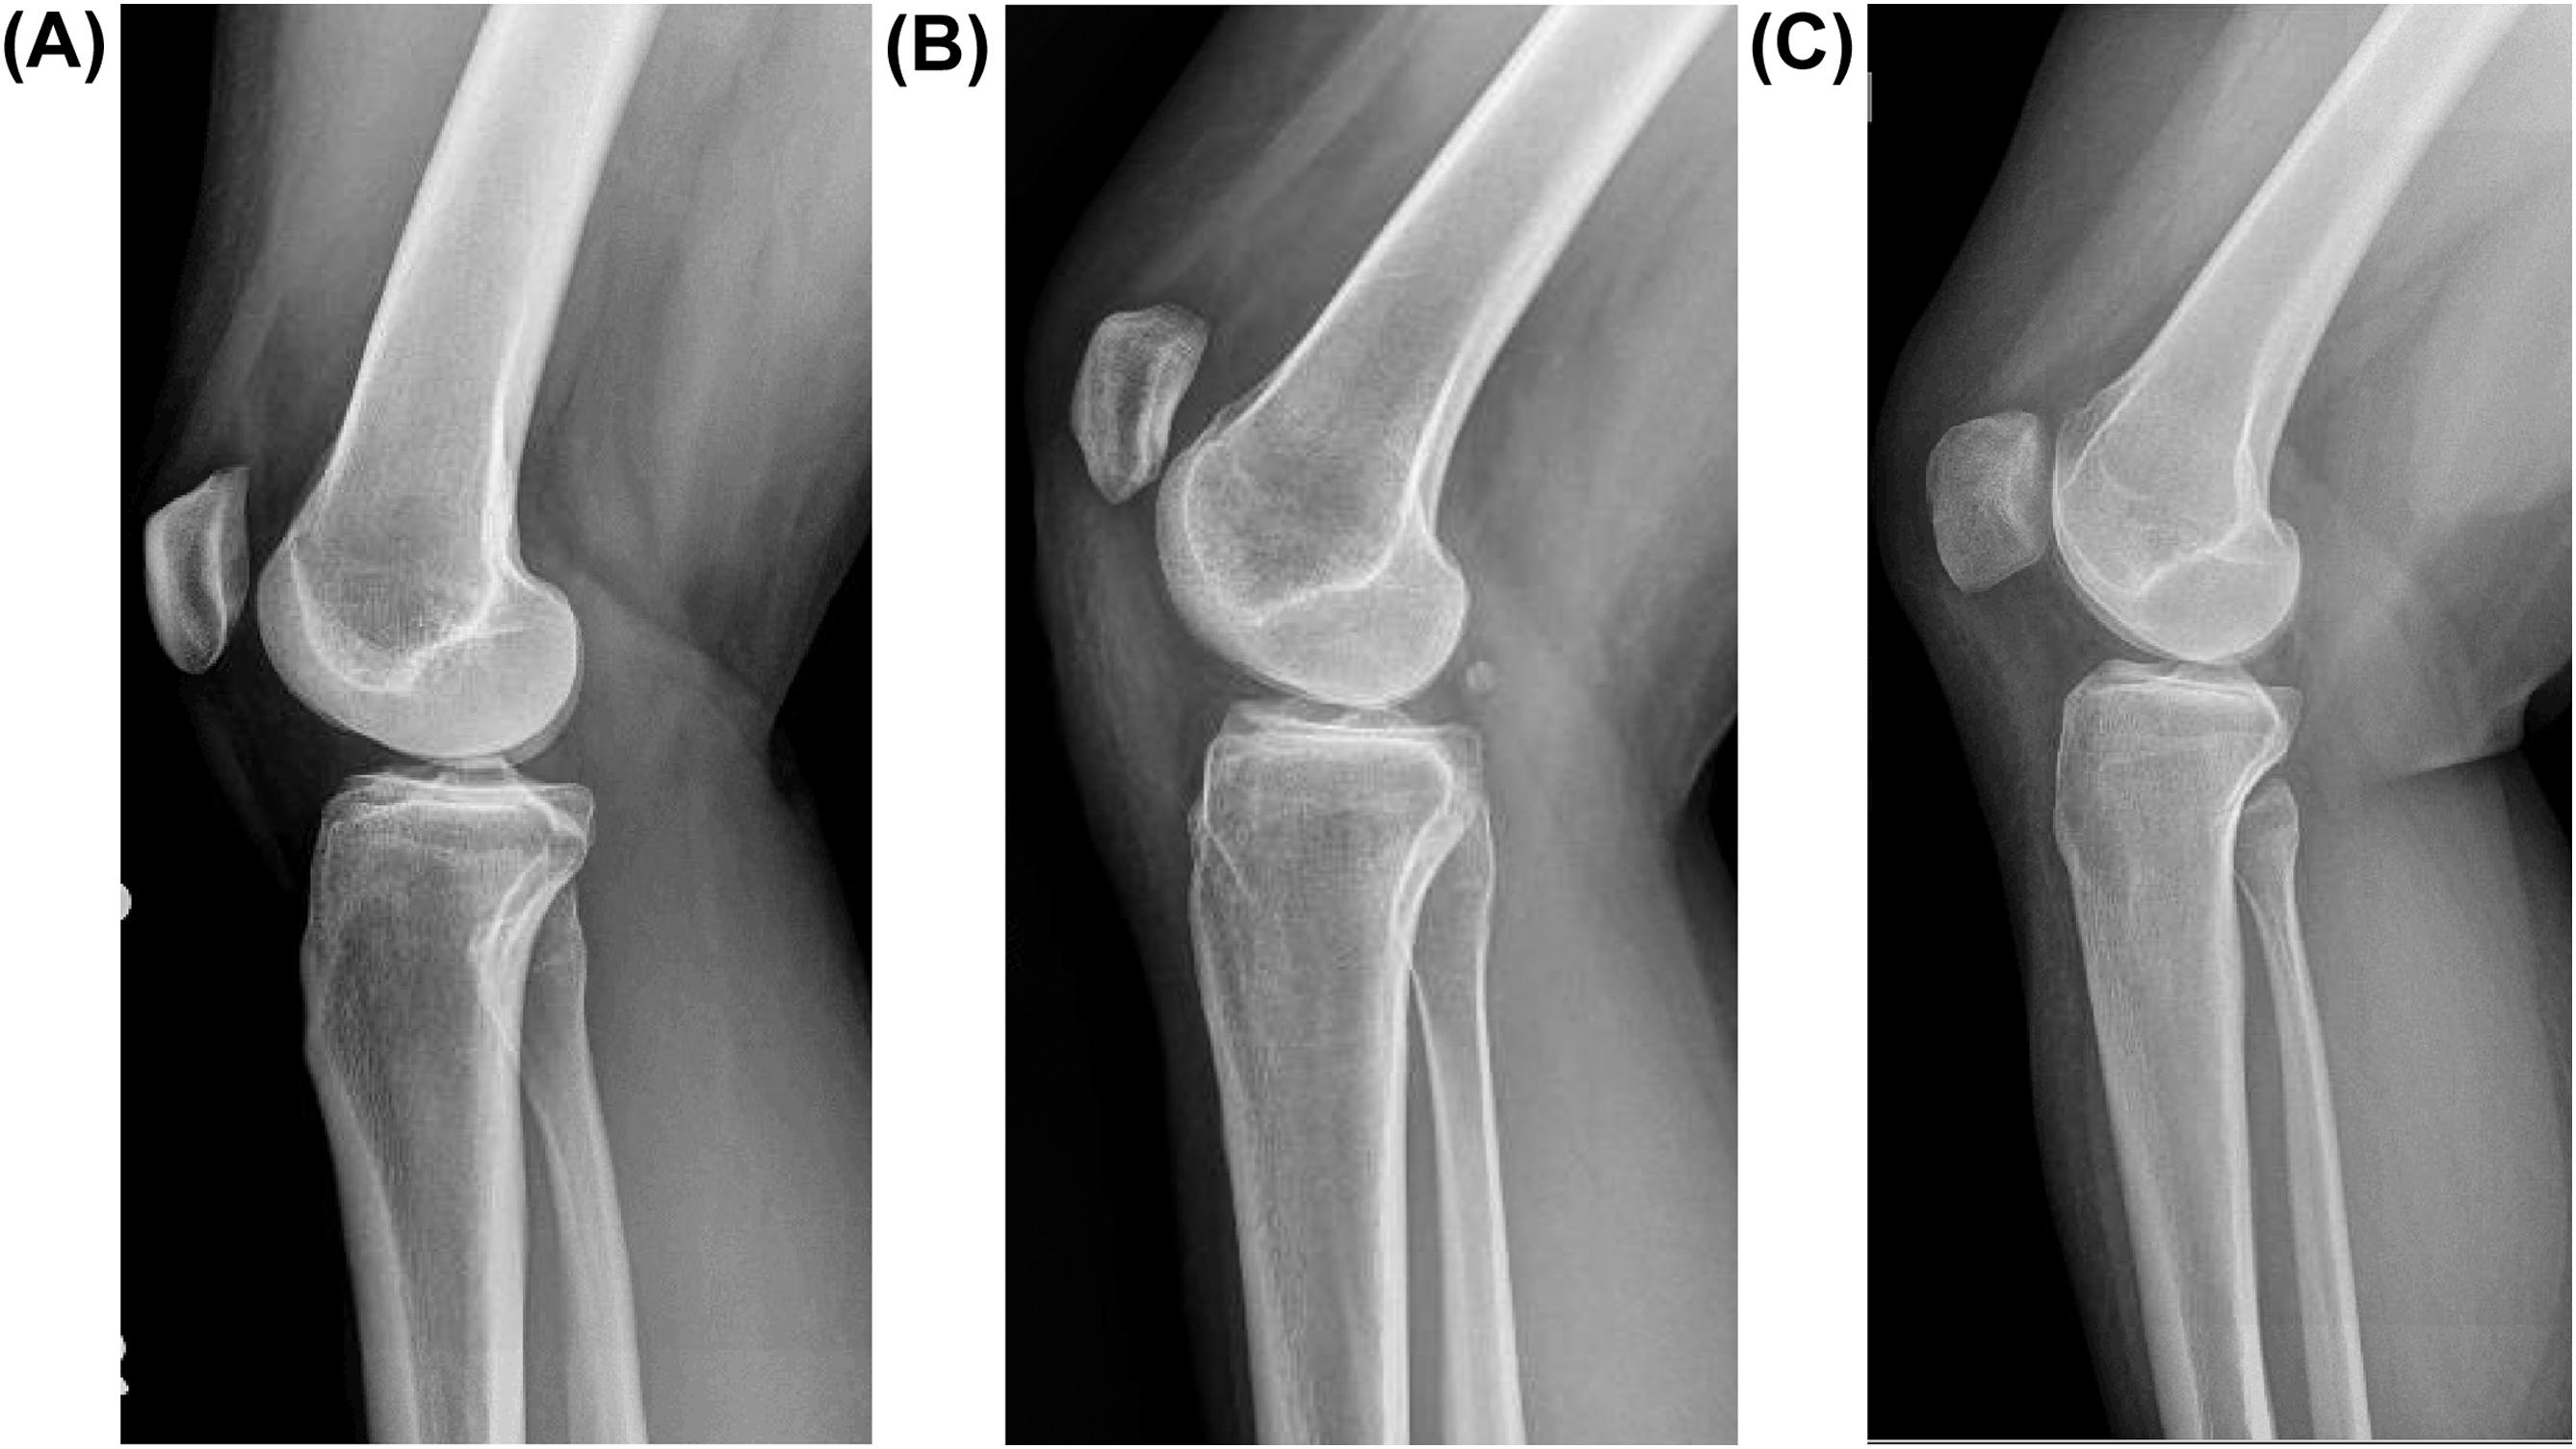 Fig. 8.1, Trochlear dysplasia. (A) Mild dysplasia: the trochlear groove line reaches the anterior femur before the anterior femoral cortical line intersects with it (“crossing sign”). (B) Moderate dysplasia: crossing sign plus small prominence of the supratrochlear bone. (C) Severe dysplasia: crossing, large supratrochlear prominence and evidence of a hypoplastic medial trochlear facet (“double contour”).